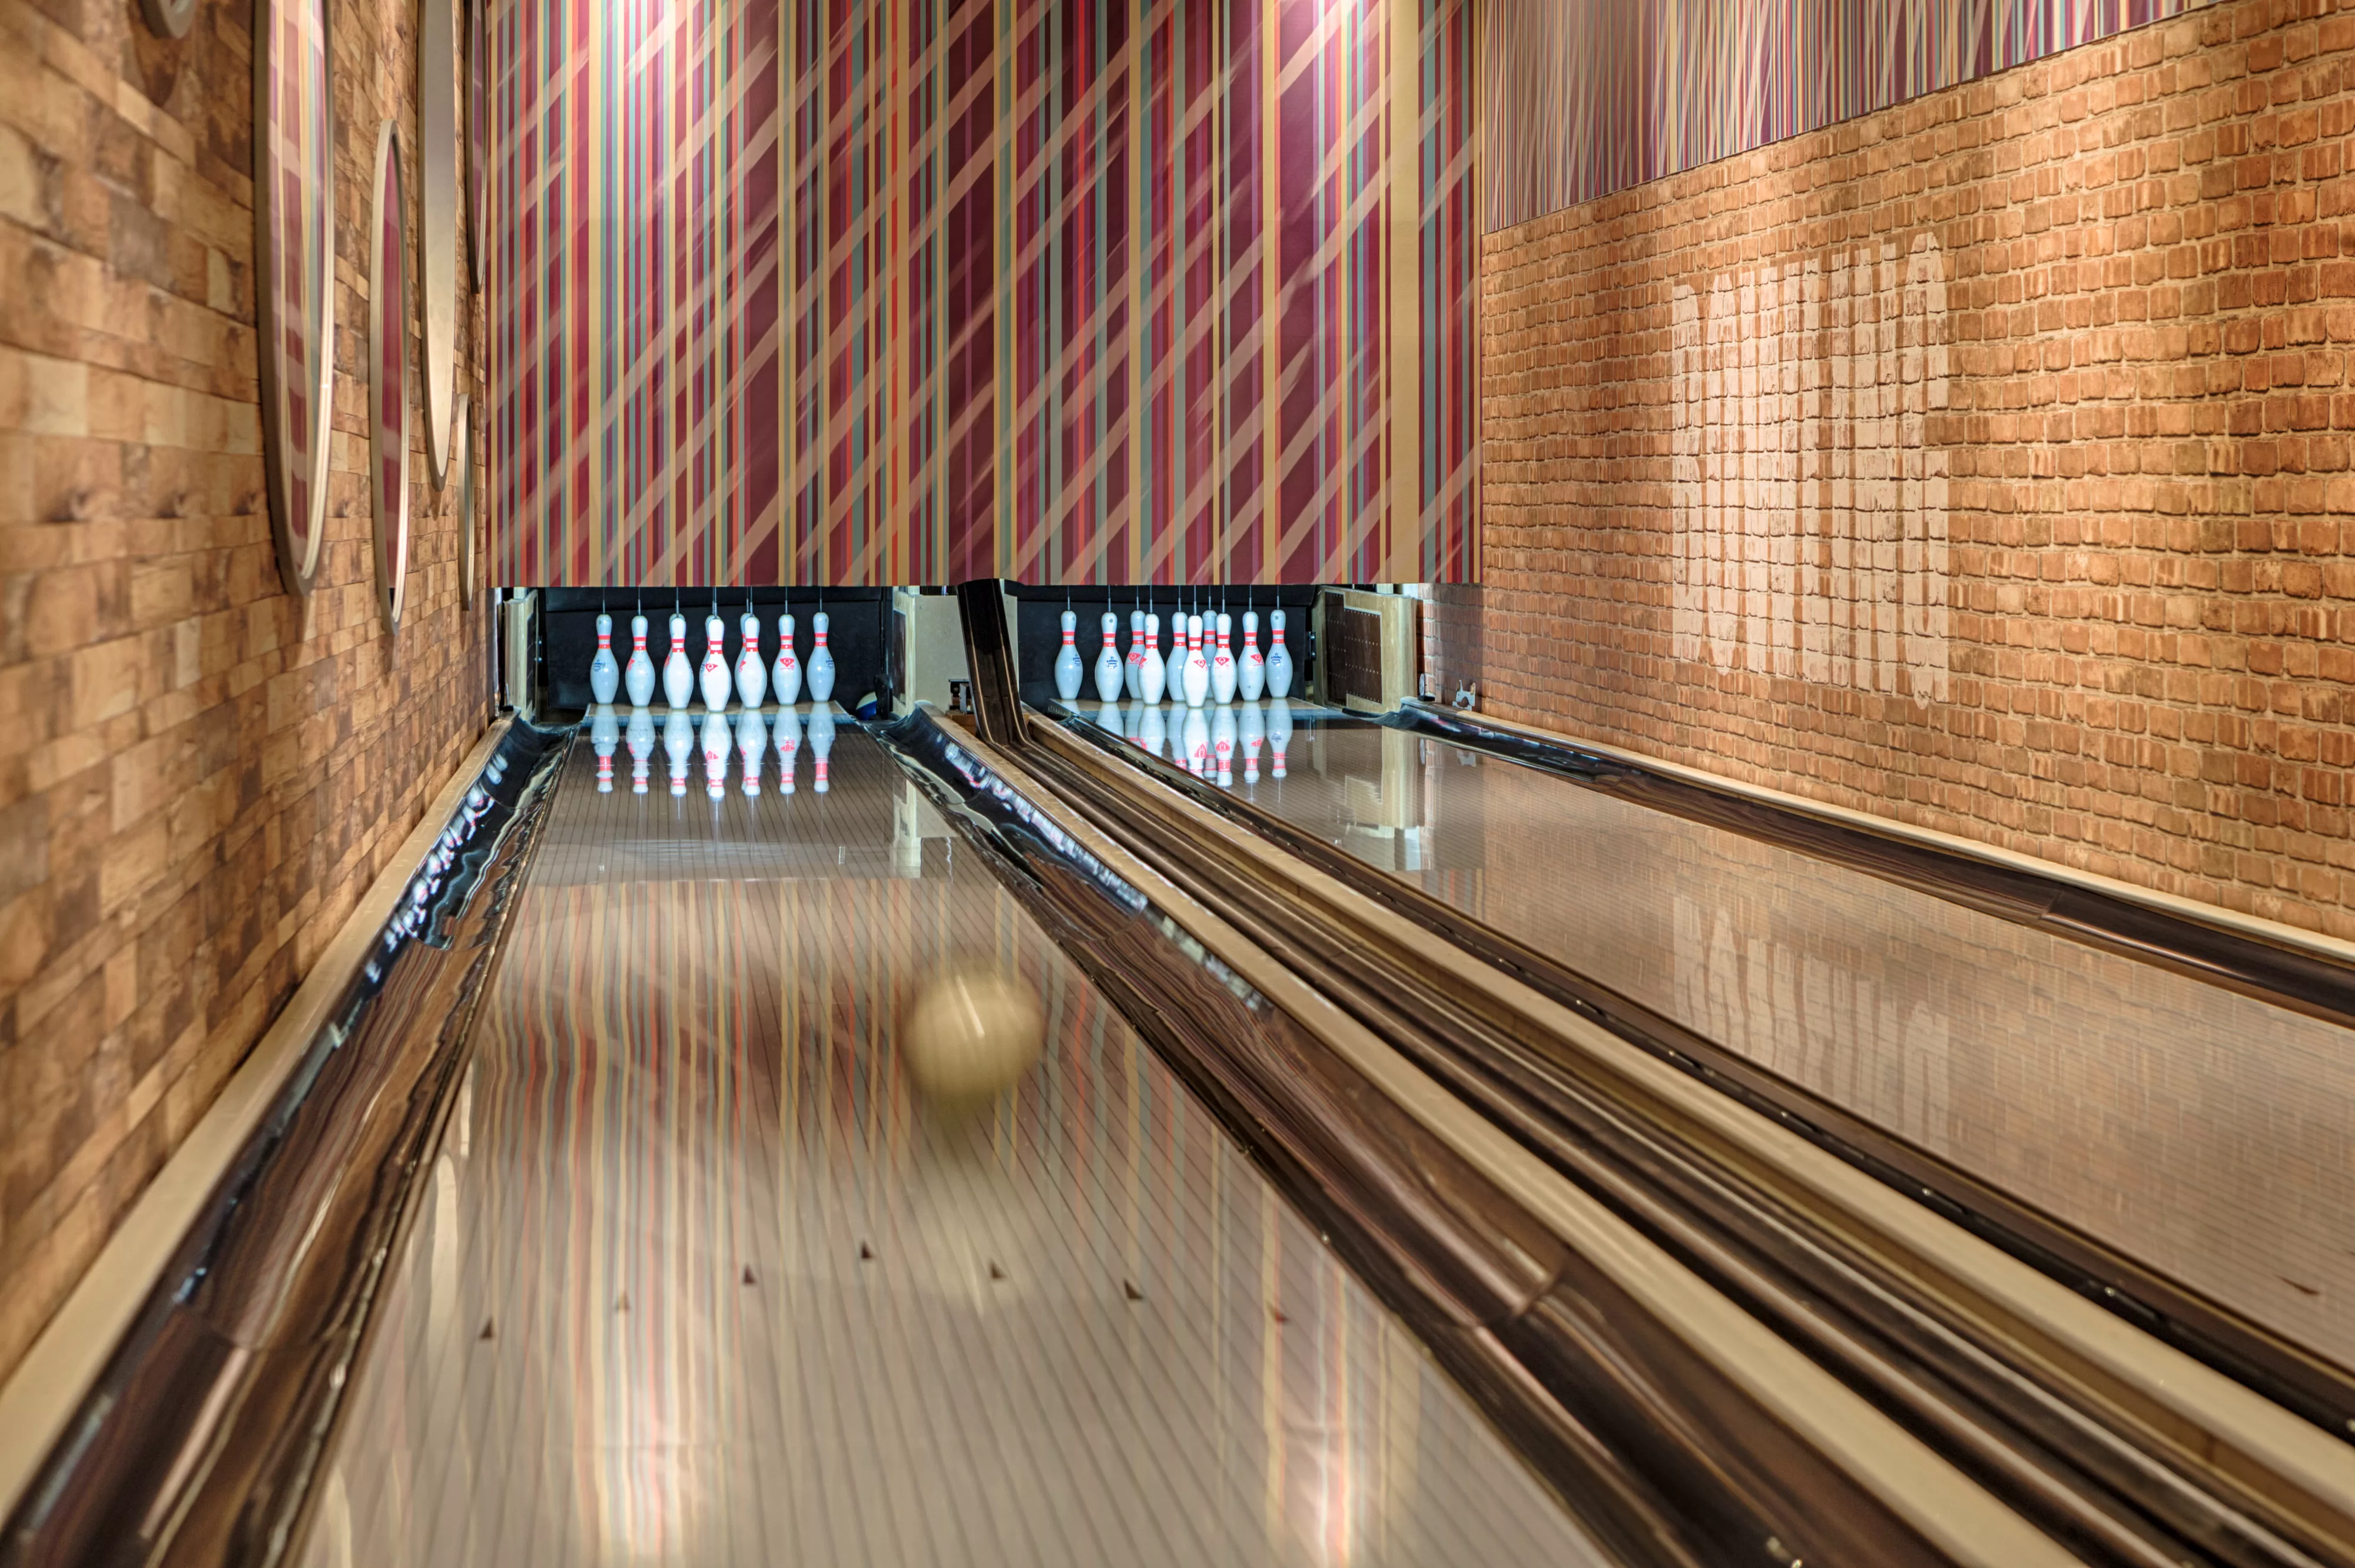 MK Bowling Entertainment Center in Poland, Europe | Bowling - Rated 4.5